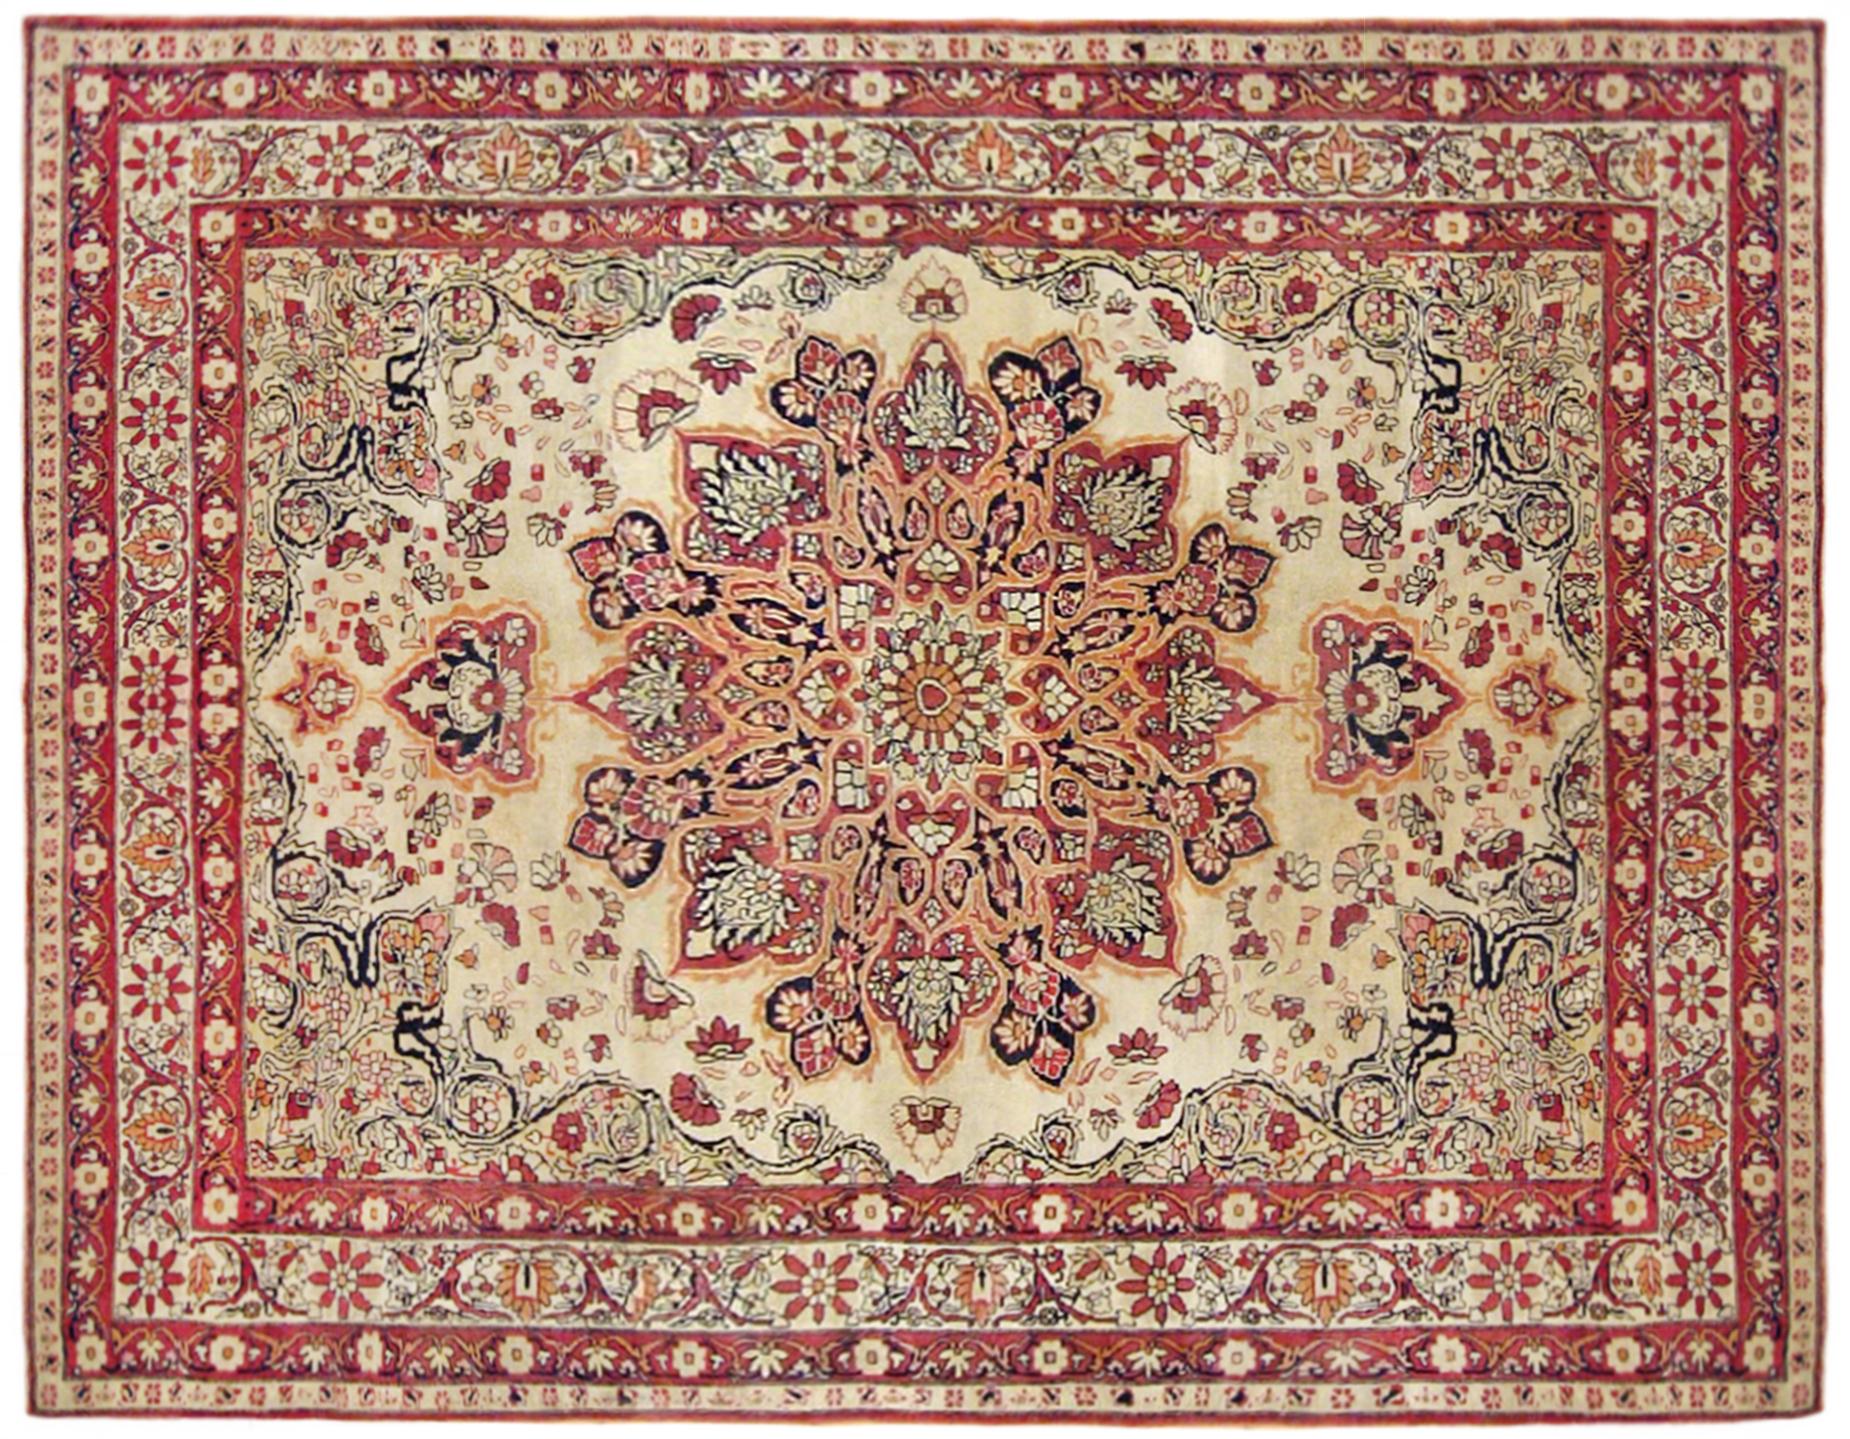 Antique Persian Lavar Oriental Carpet, in Room Size, with a Central Medallion